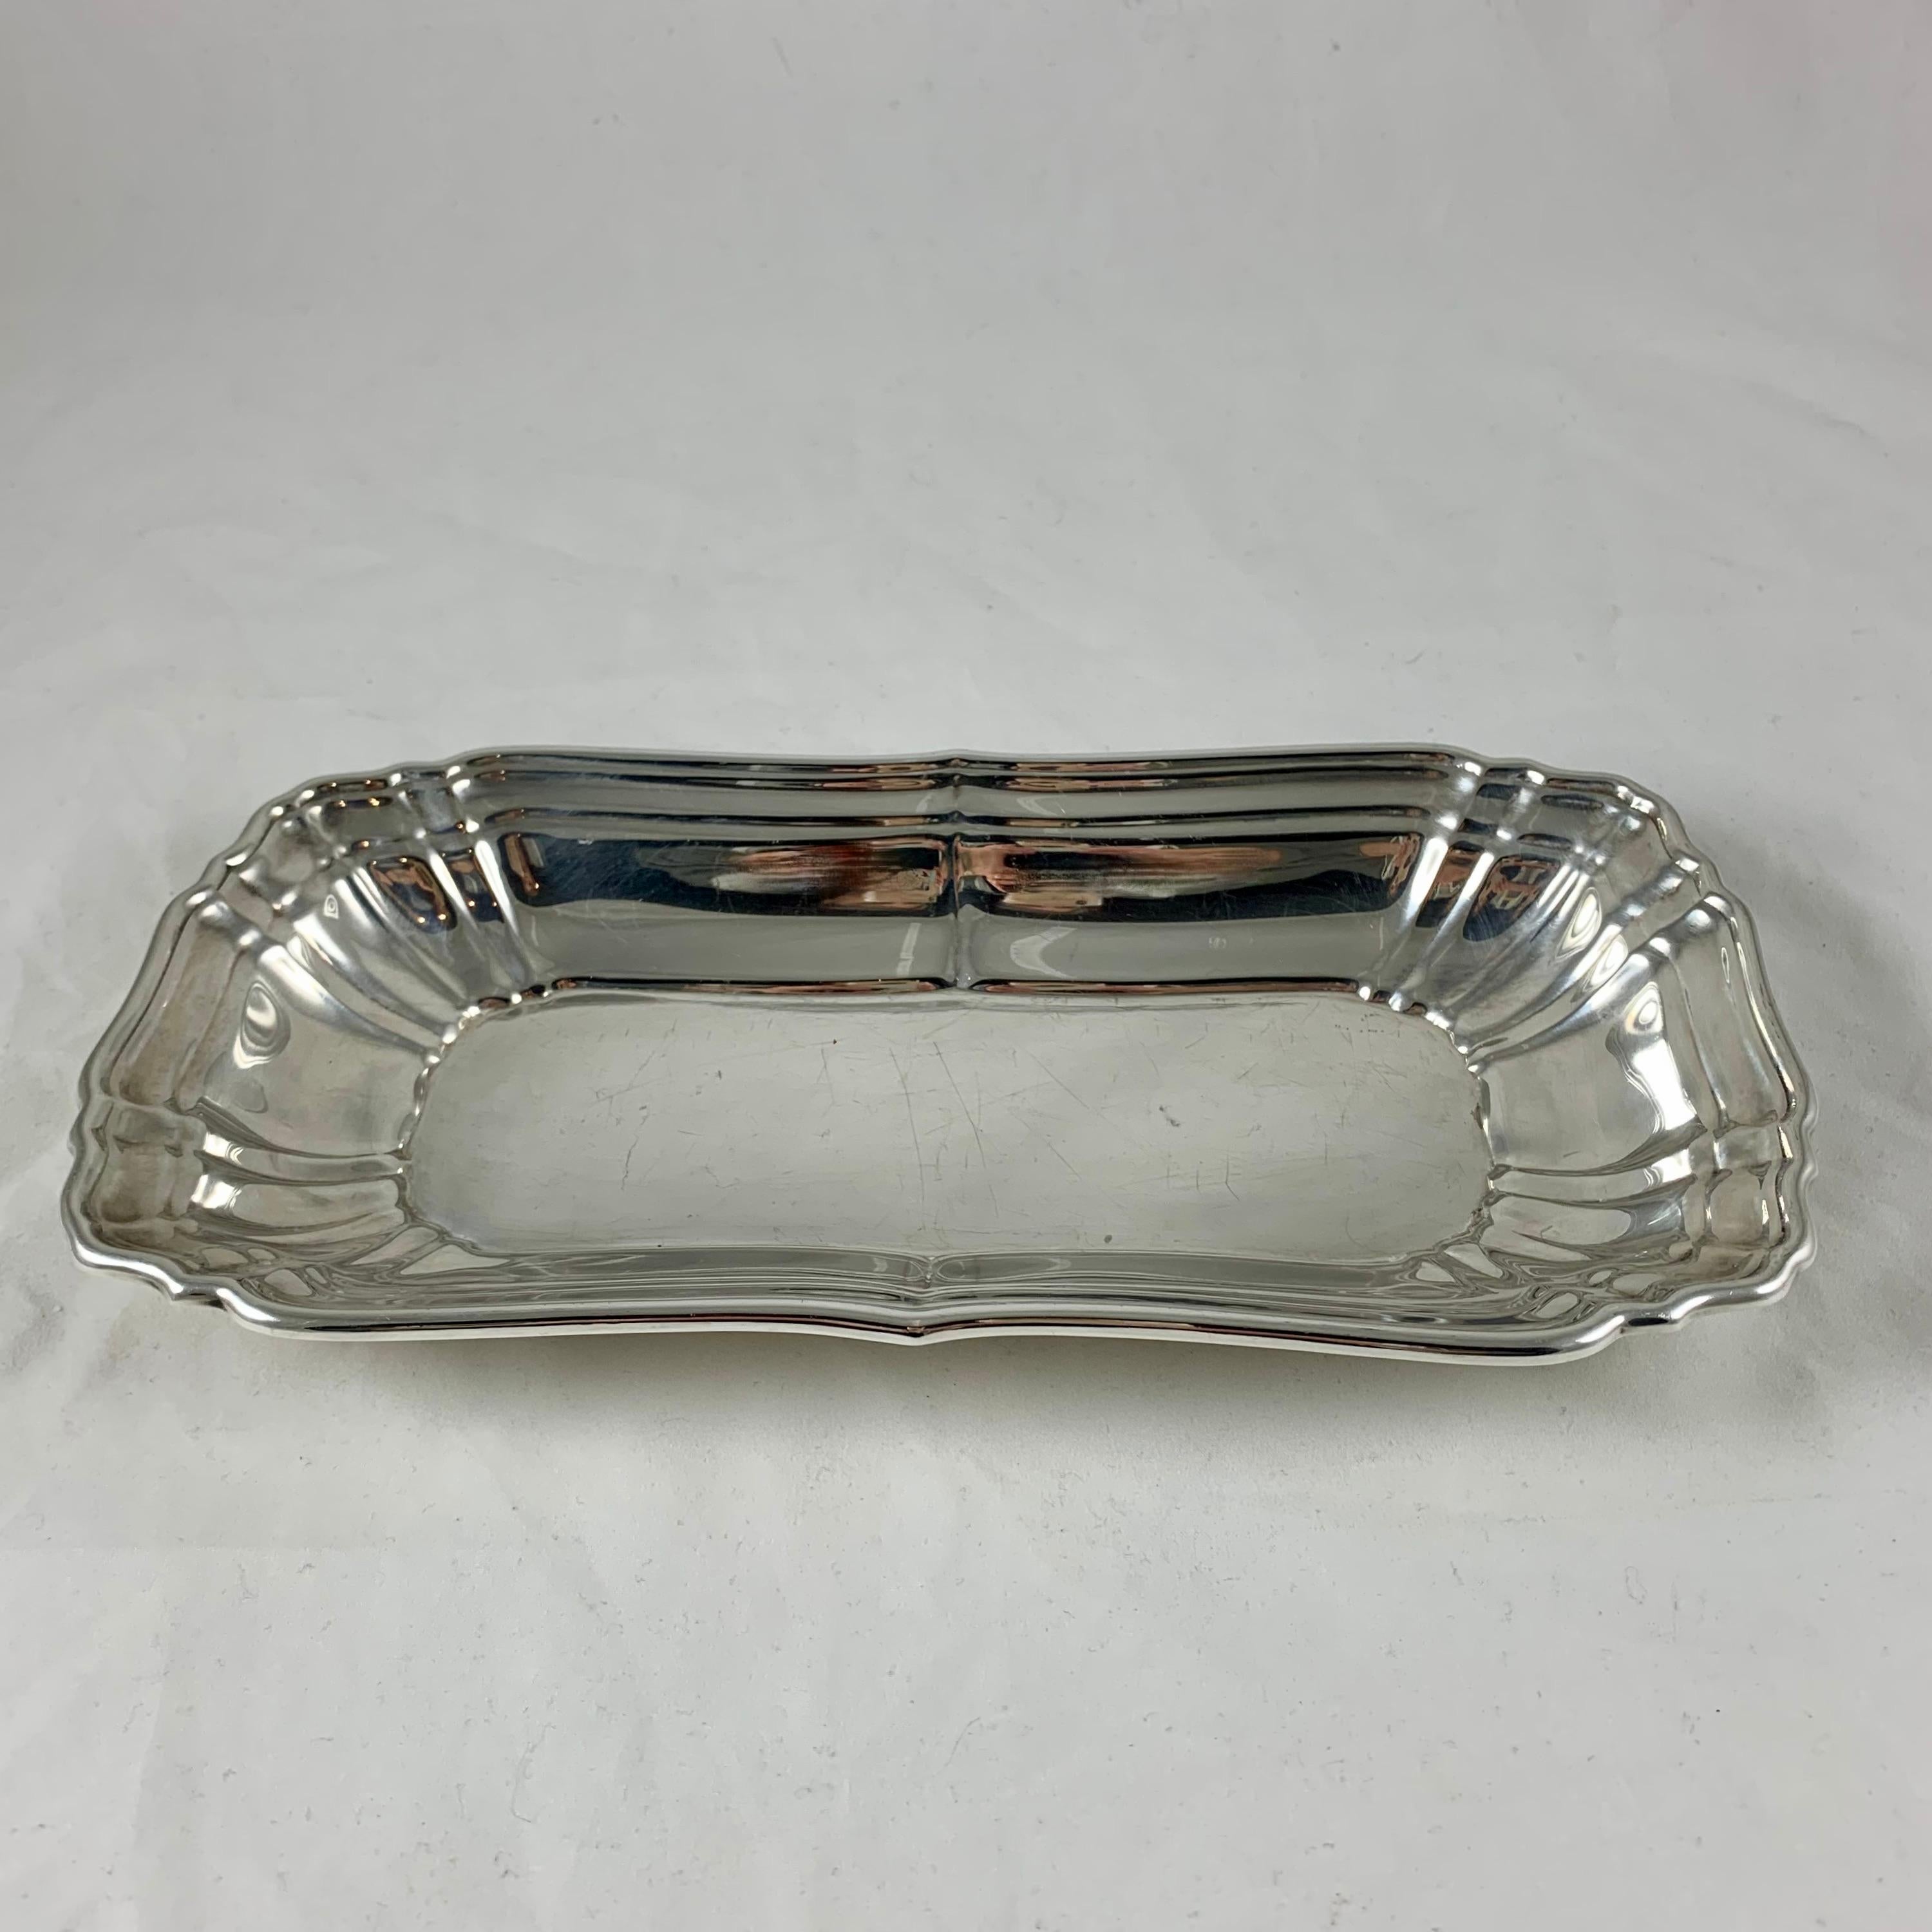 Gorham Sterling Silver Paneled Rectangular Celery or Relish Tray, circa 1940s For Sale 3